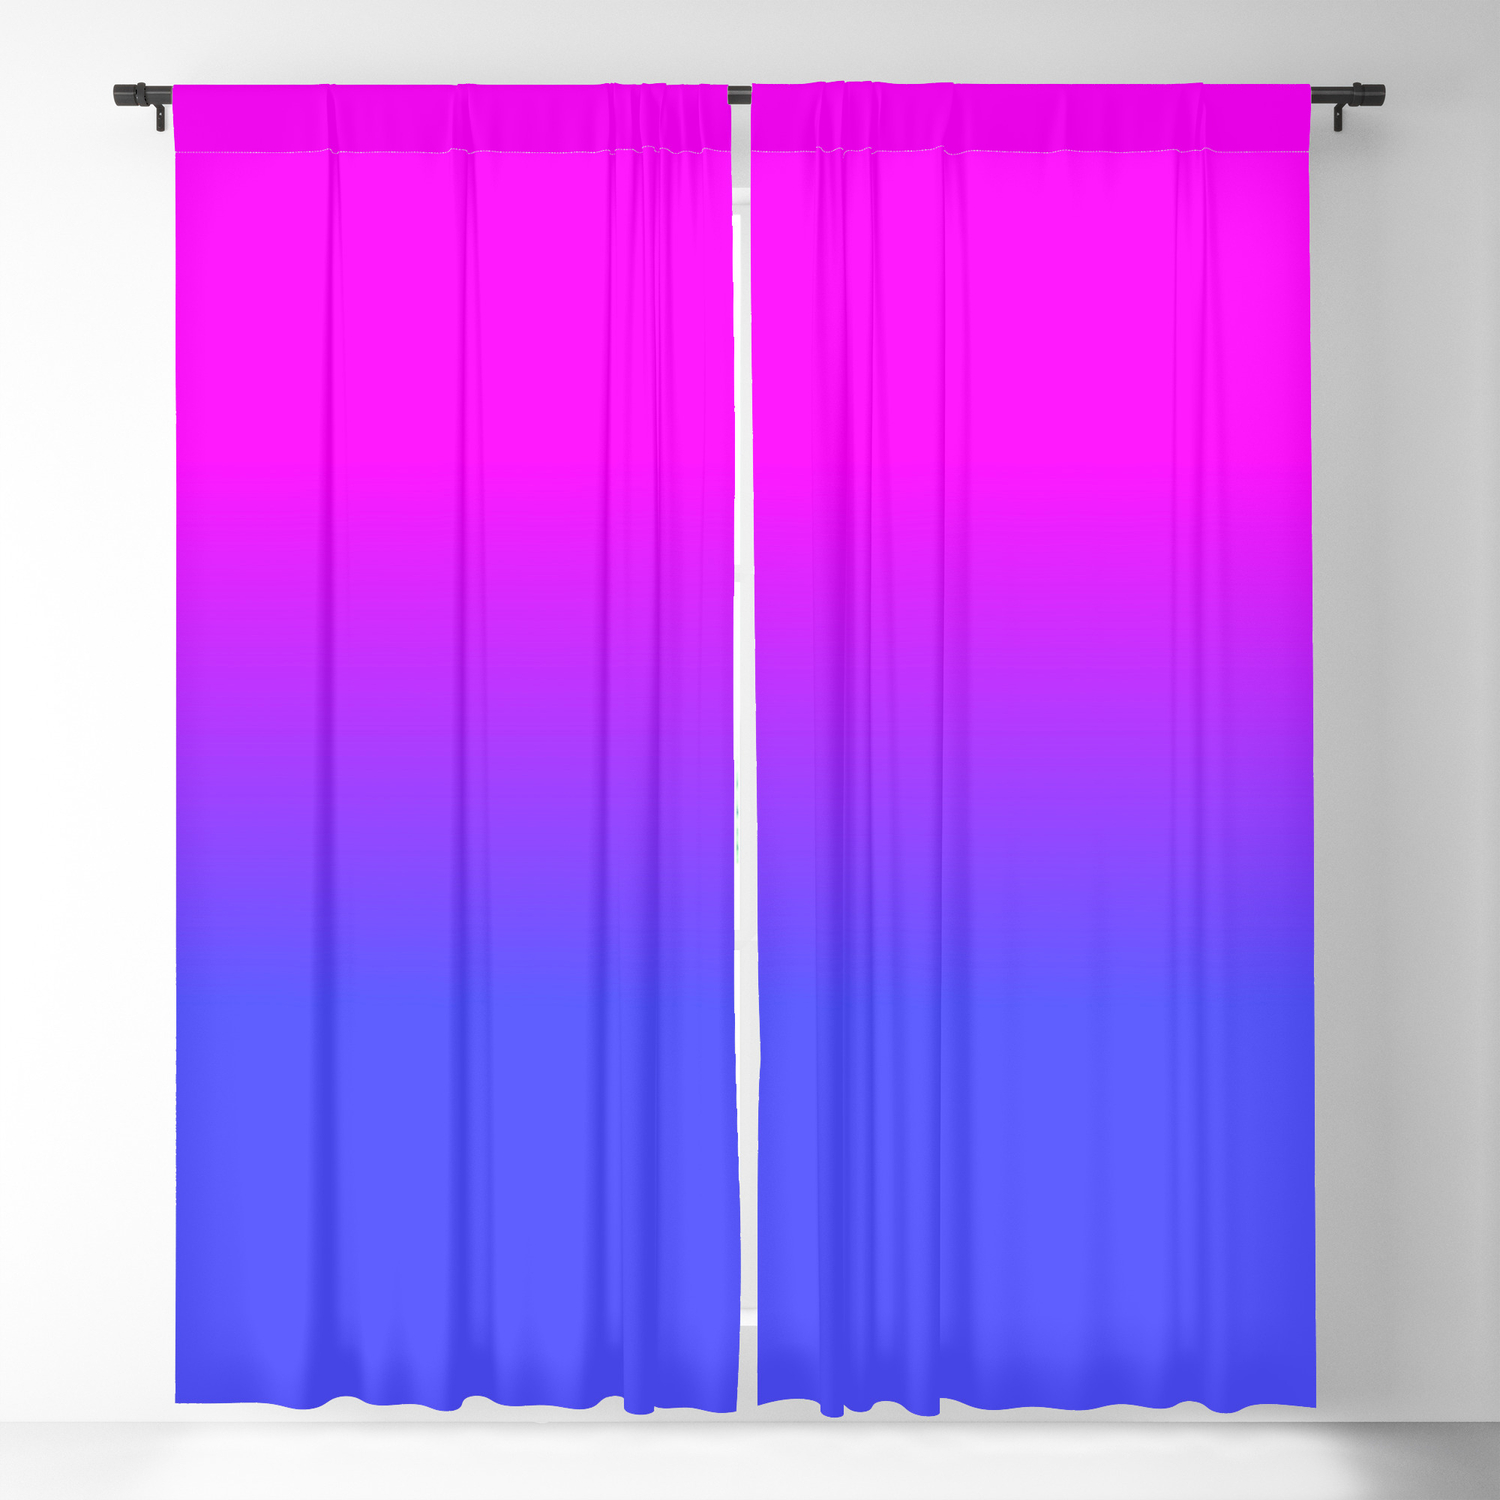 Neon Blue And Hot Pink Ombre Shade Color Fade Blackout Curtain By